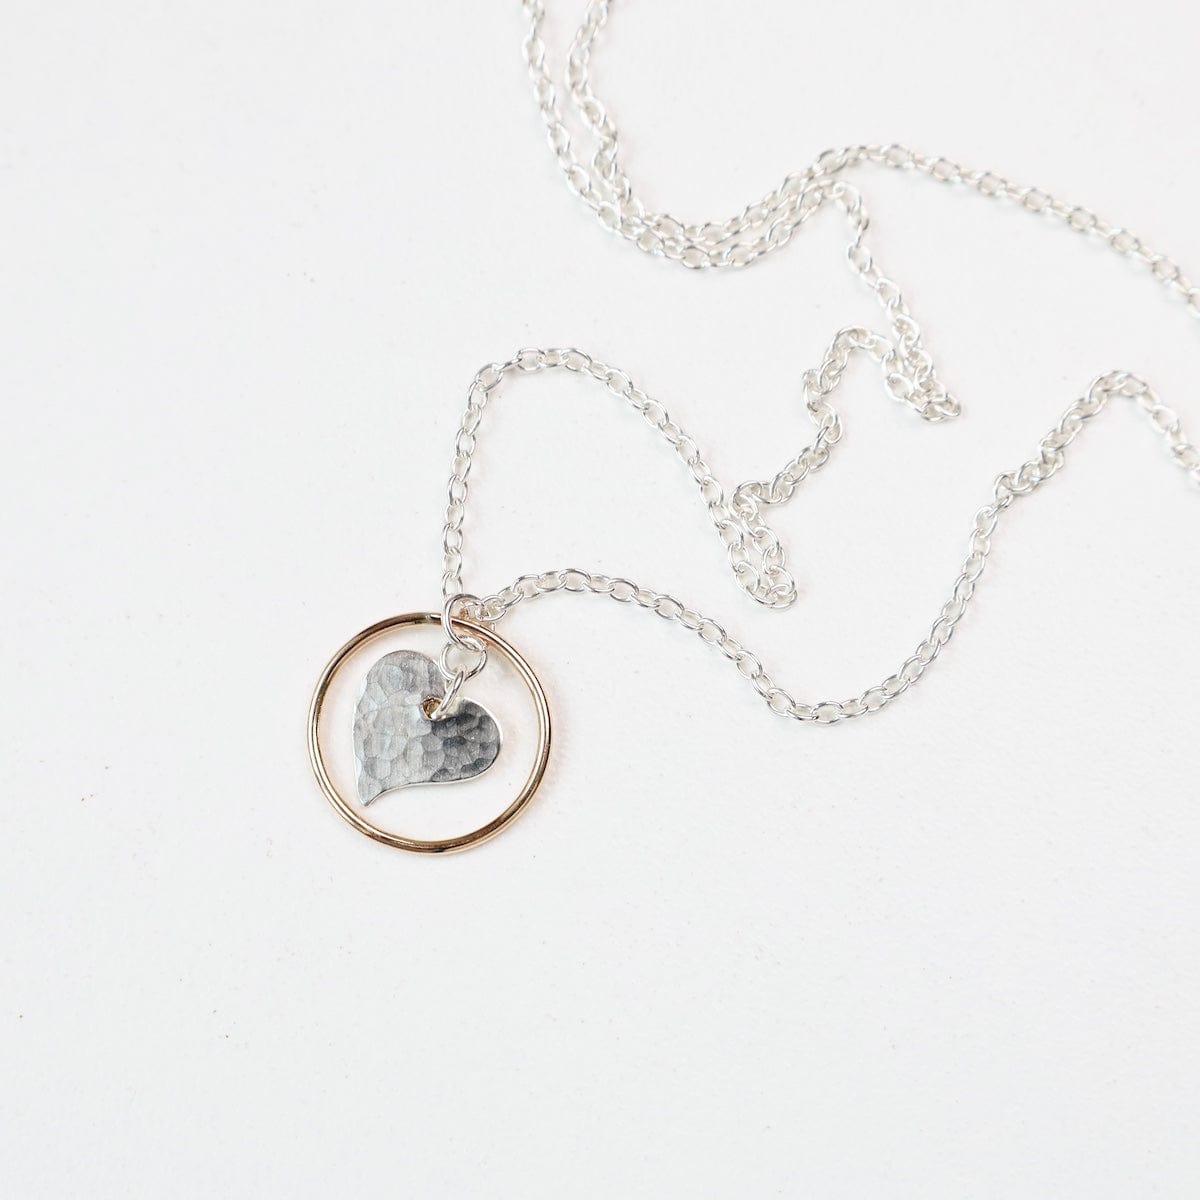 NKL Hammered Heart in Circle Necklace